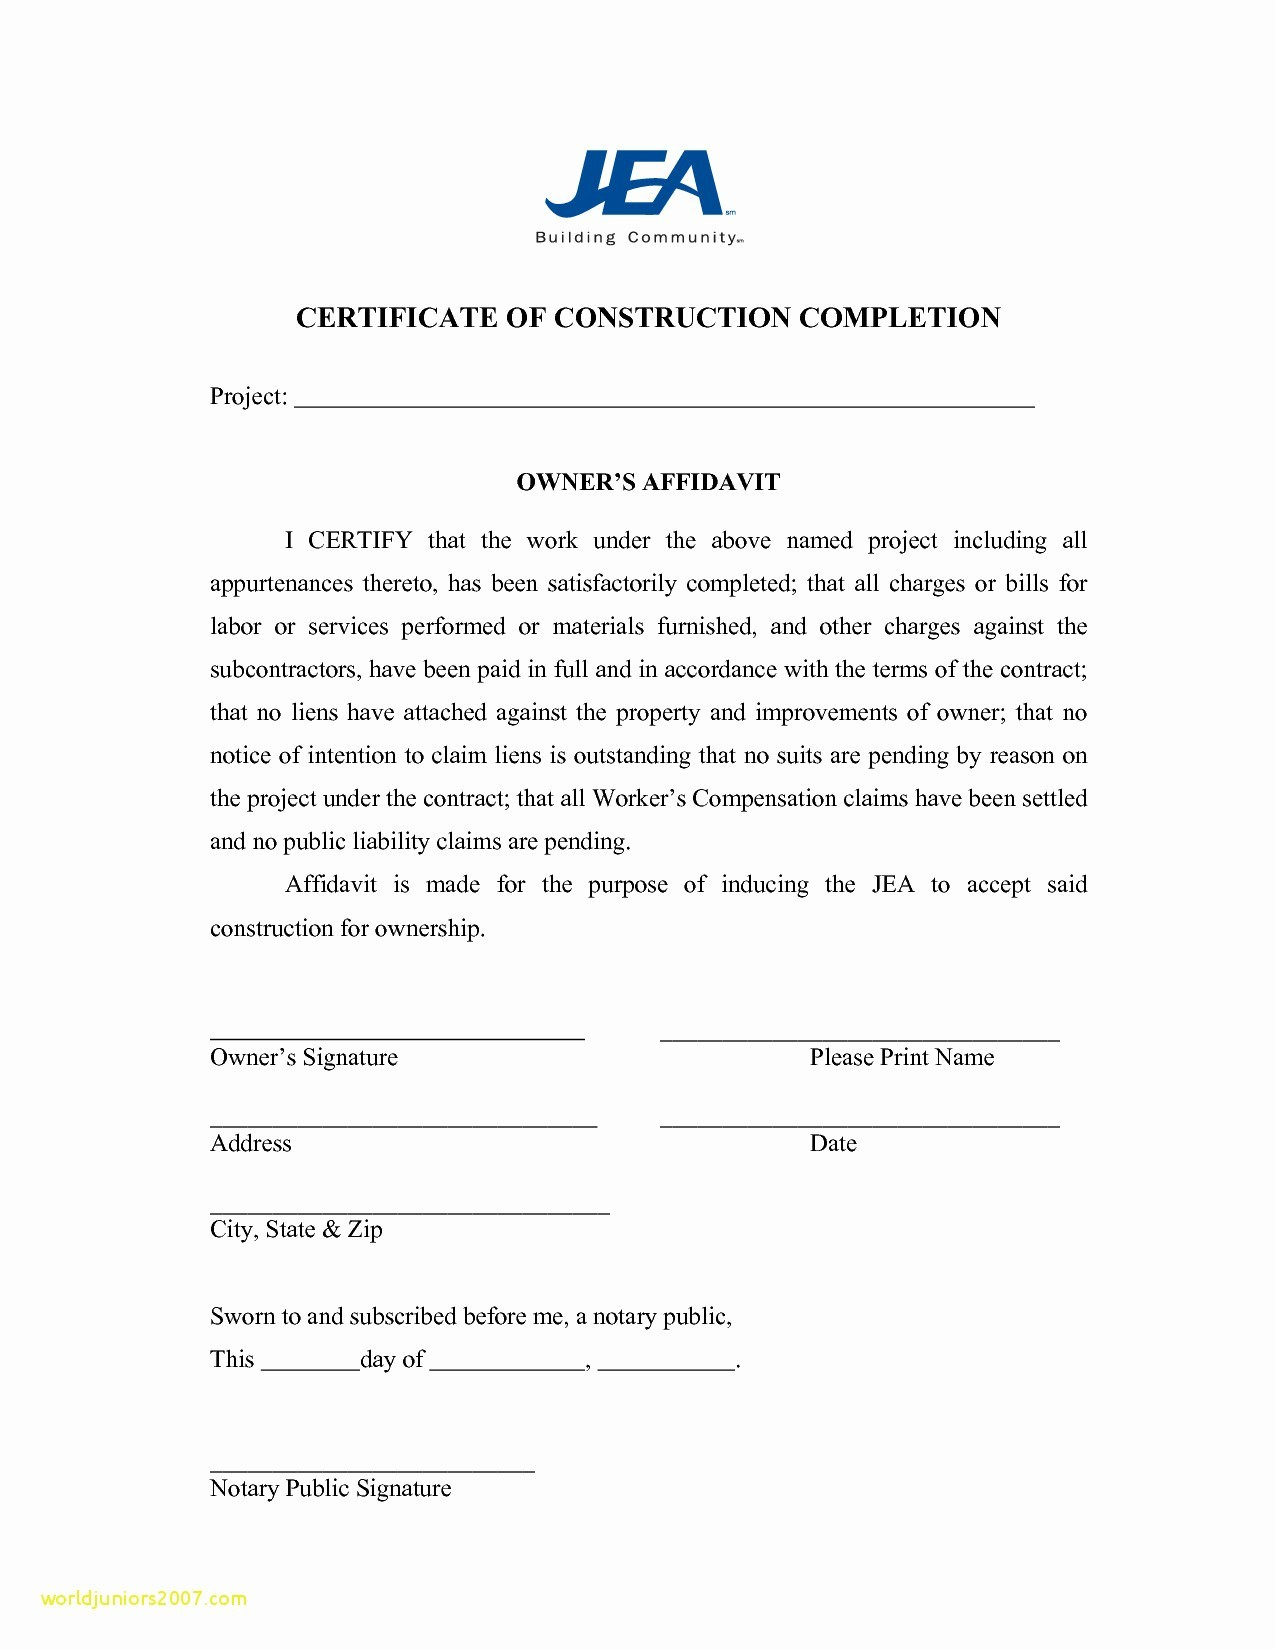 Letter Of Substantial Completion Template Examples | Letter Within Practical Completion Certificate Template Jct